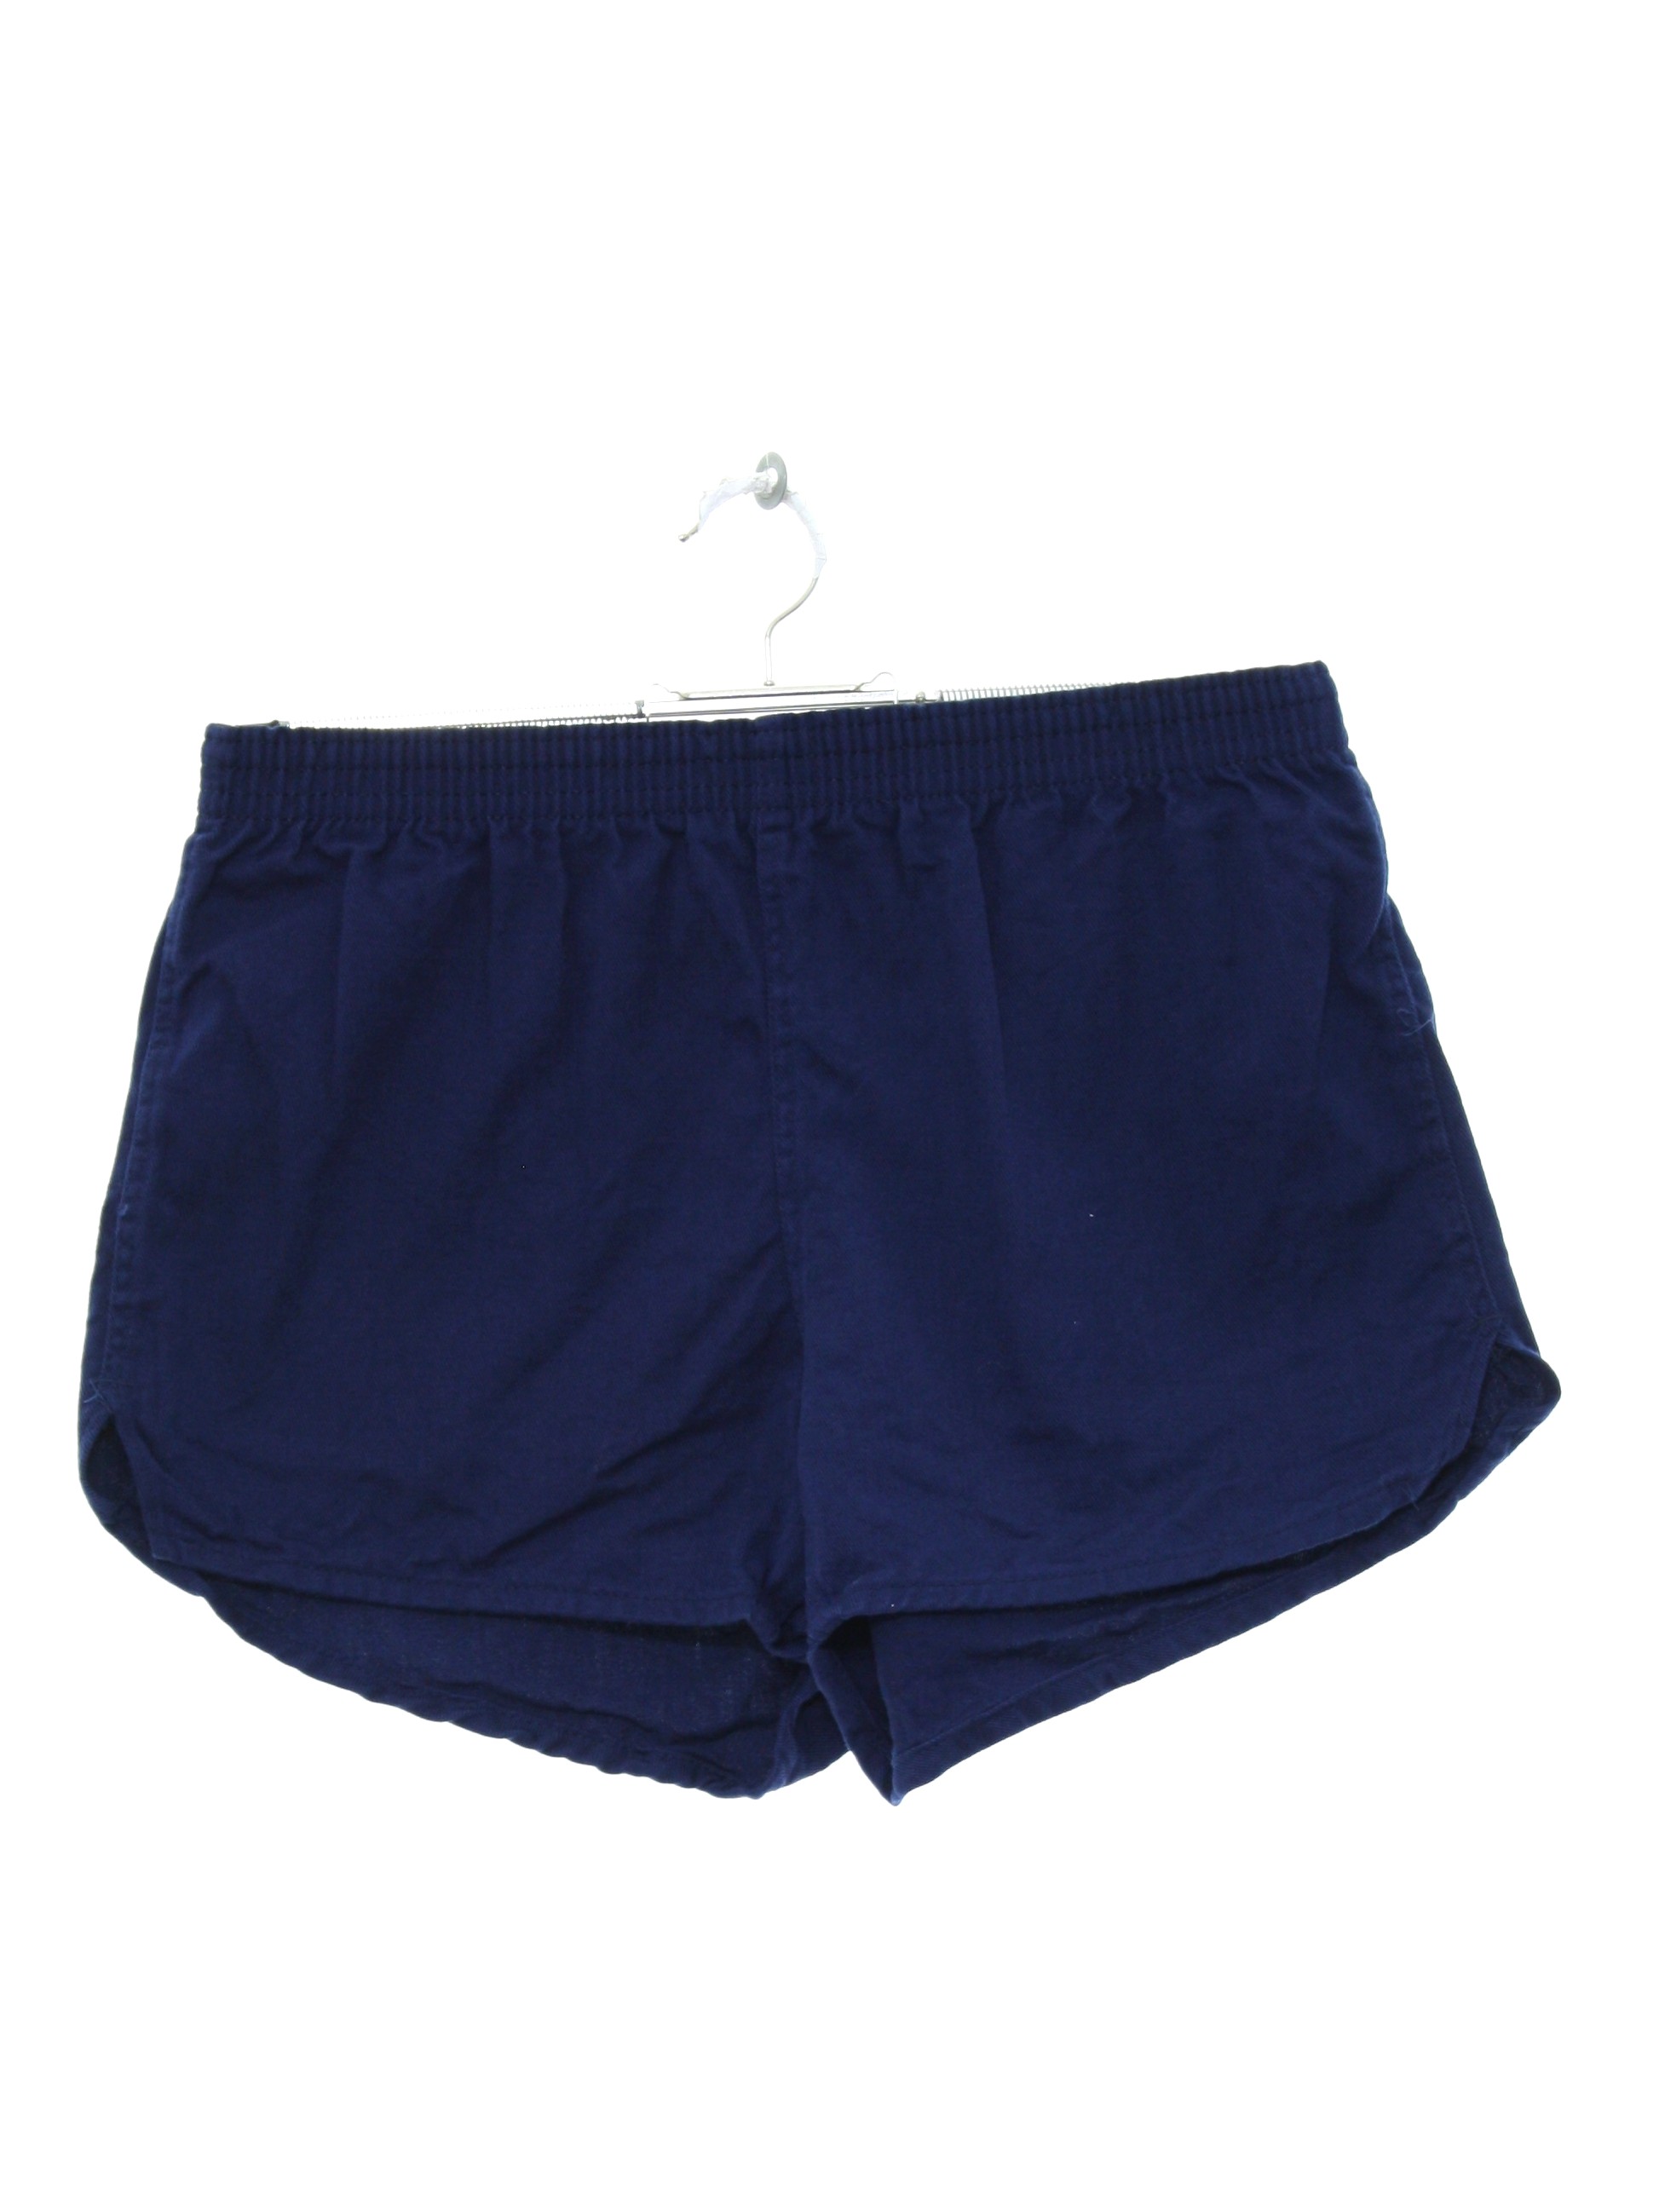 Vintage 1980's Shorts: 80s -Russell Athletic- Mens dark blue solid ...